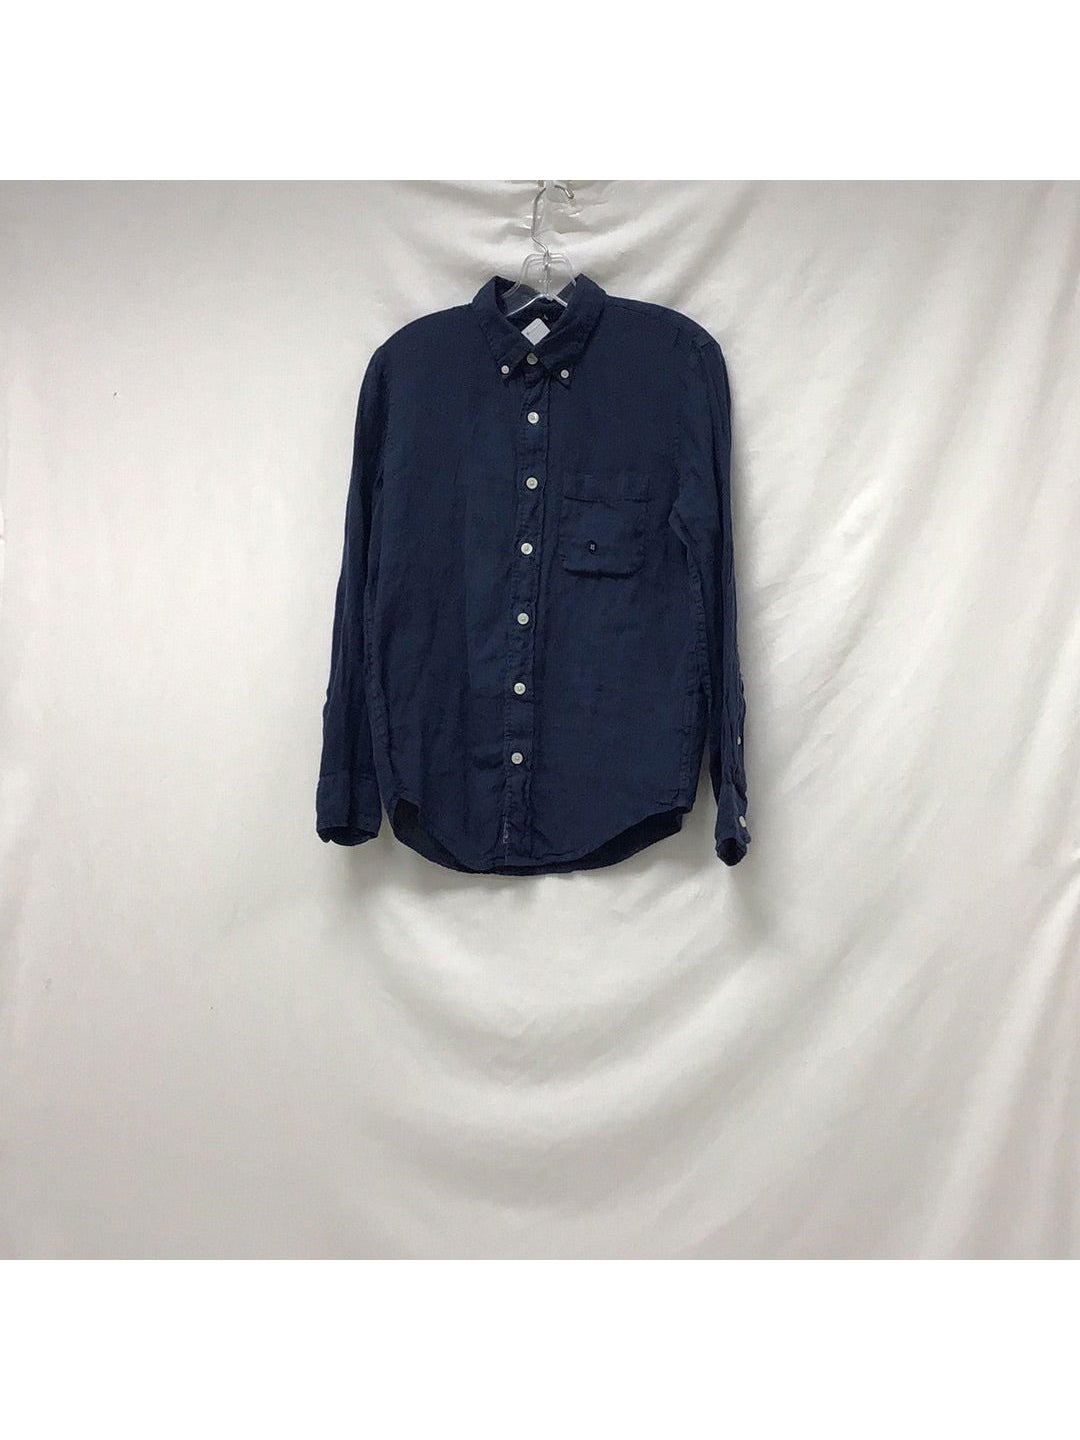 Men's Abercrombie & Fitch Navy Blue Button Down Long Sleeve Shirt XS - The Kennedy Collective Thrift - 